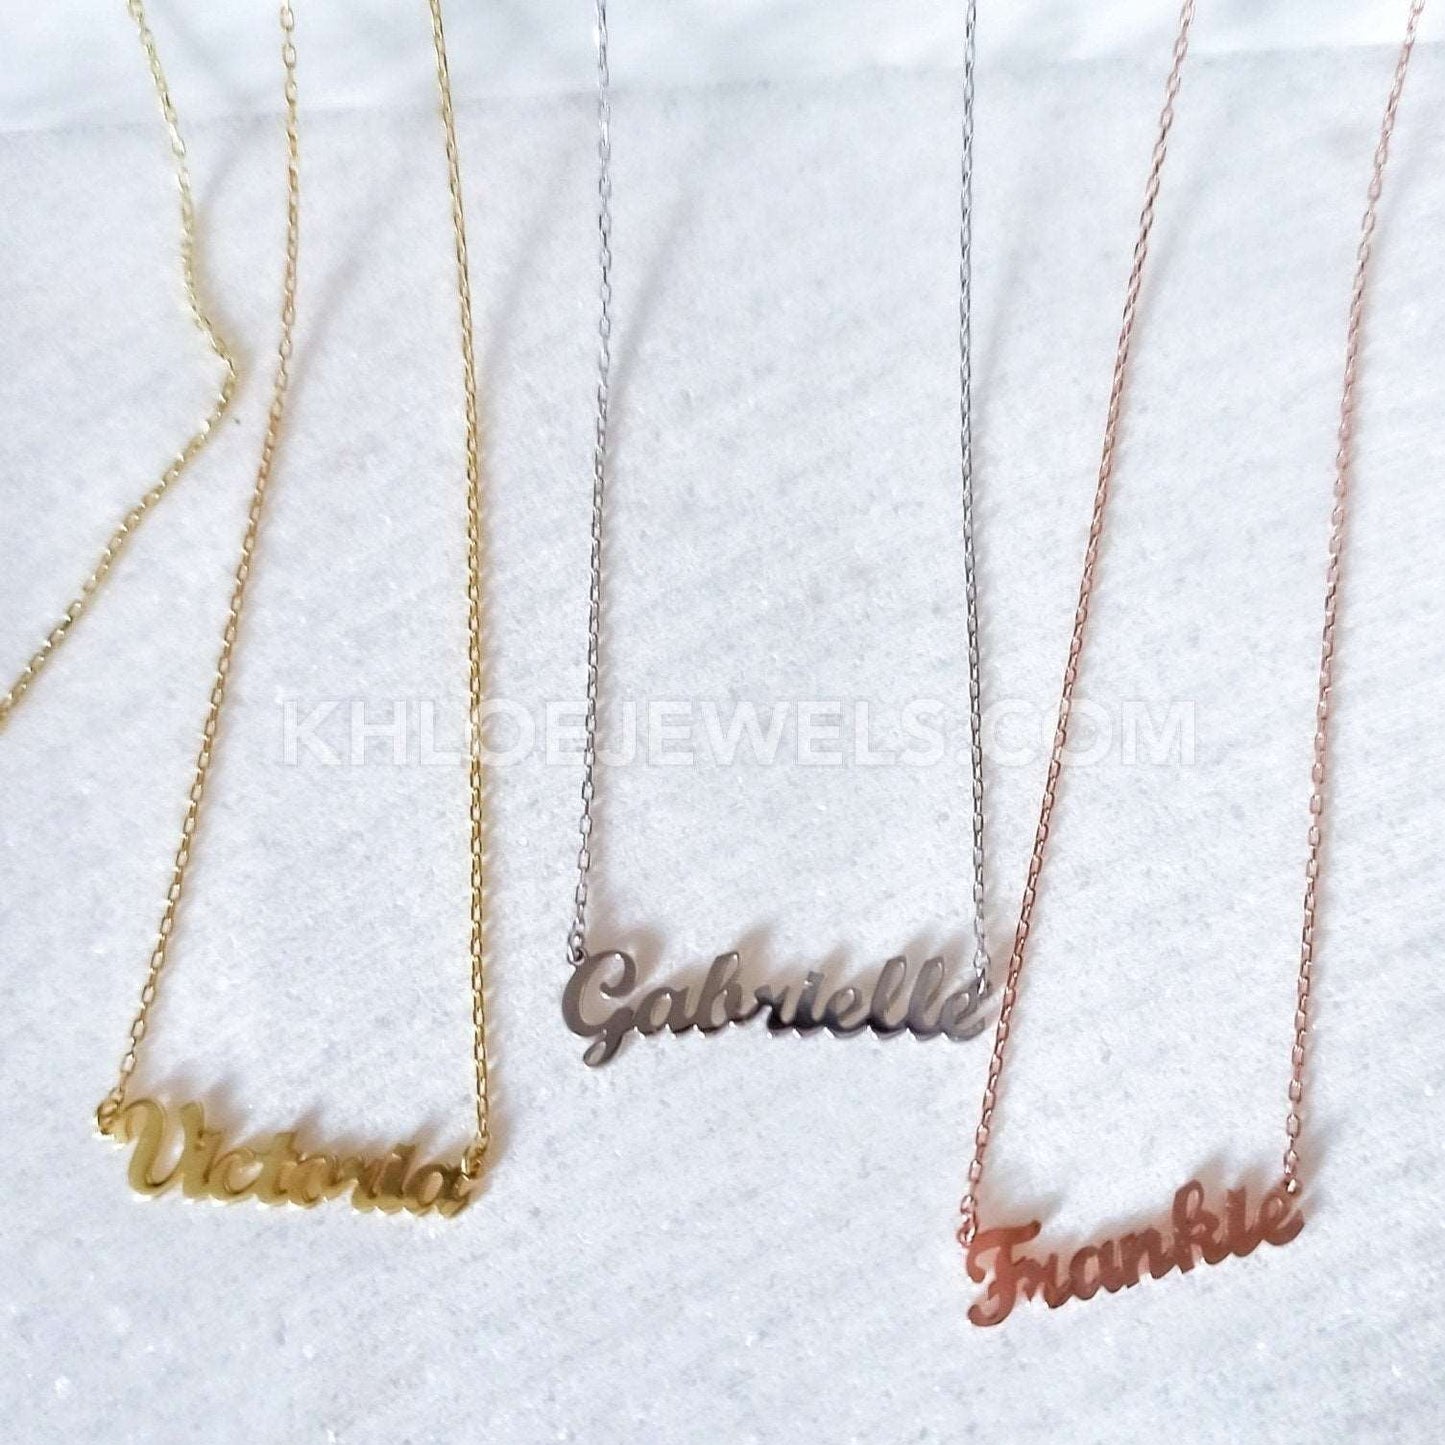 Necklaces Custom Name Necklace | Sterling Silver KHLOE JEWELS Custom Jewelry